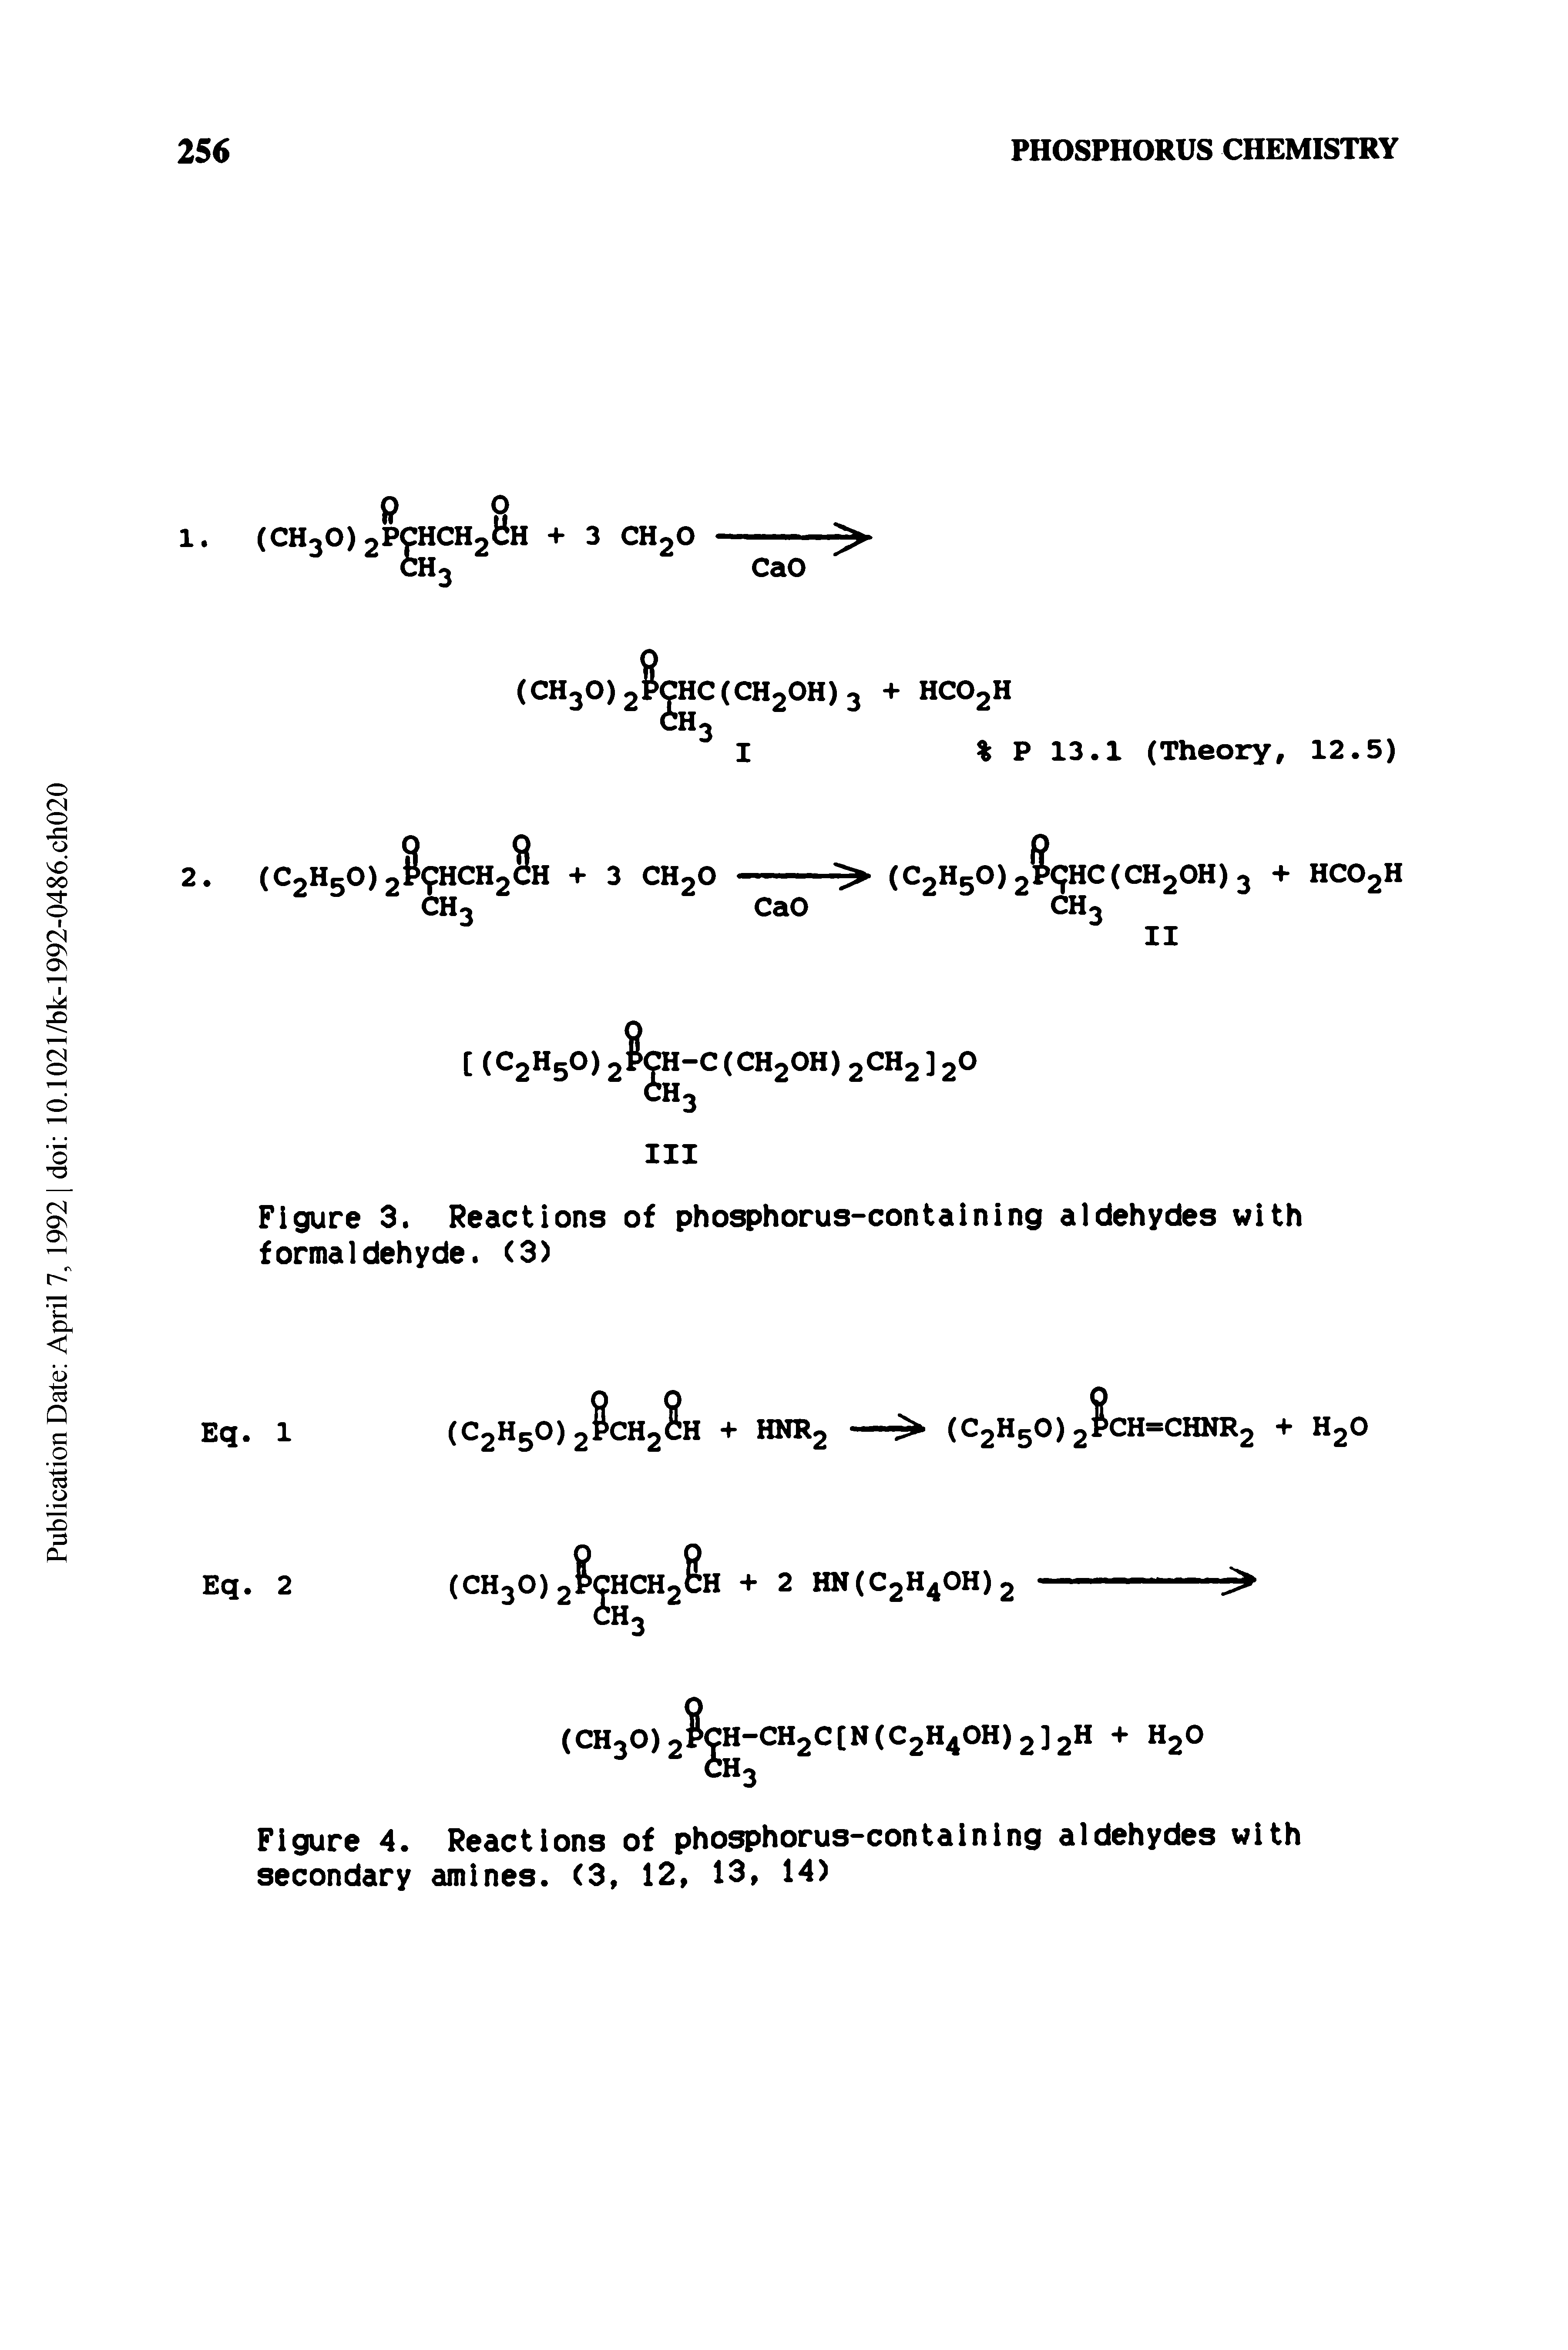 Figure 3. Reactions of phosphorus-containing aldehydes with formaldehyde. (3)...